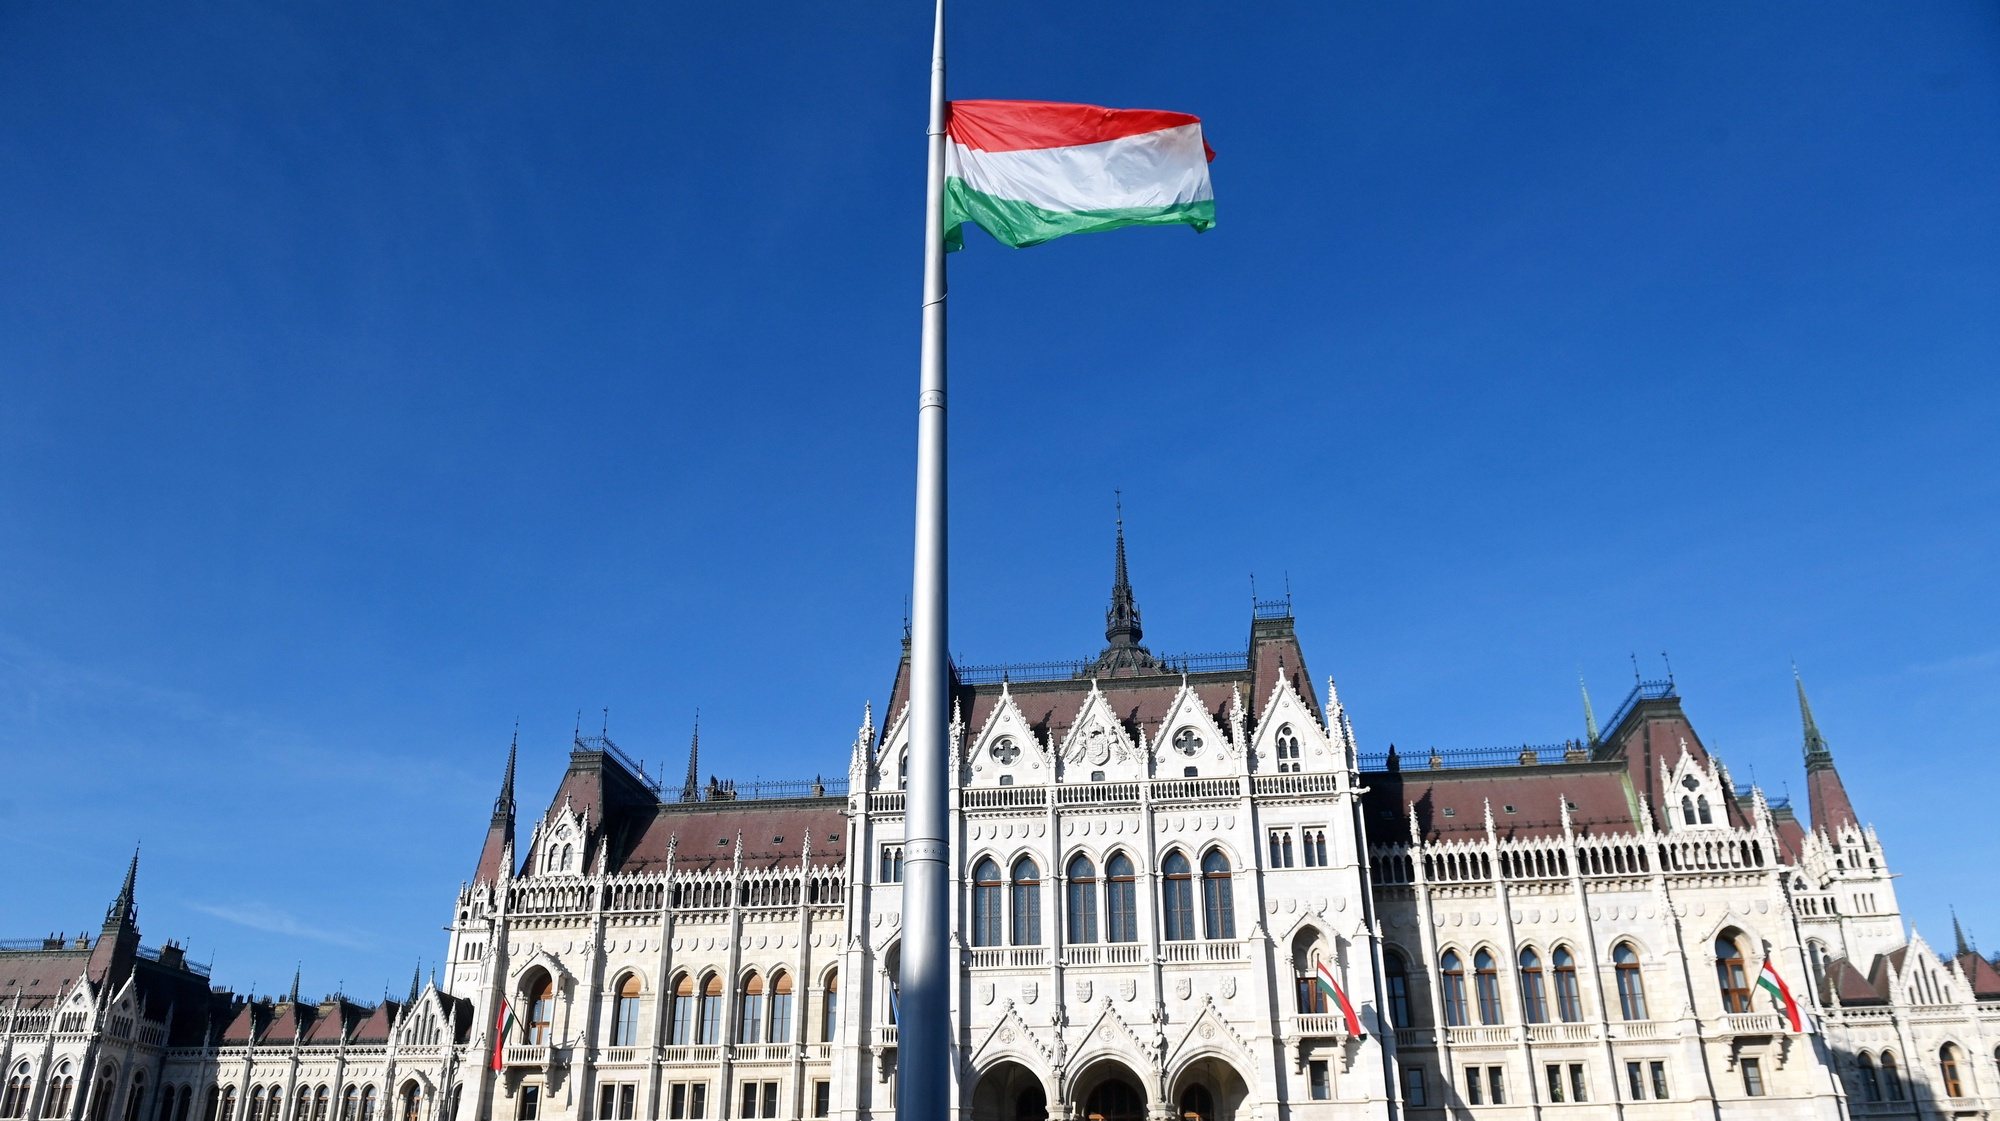 epa10260556 The Hungarian flag flies after being hoisted by honor guards during the state commemoration of the national holiday marking the 66th anniversary of the outbreak of the Hungarian revolution and war of independence against communist rule and the Soviet Union in 1956, at the Parliament building in Budapest, Hungary, 23 October 2022.  EPA/Noemi Bruzak HUNGARY OUT